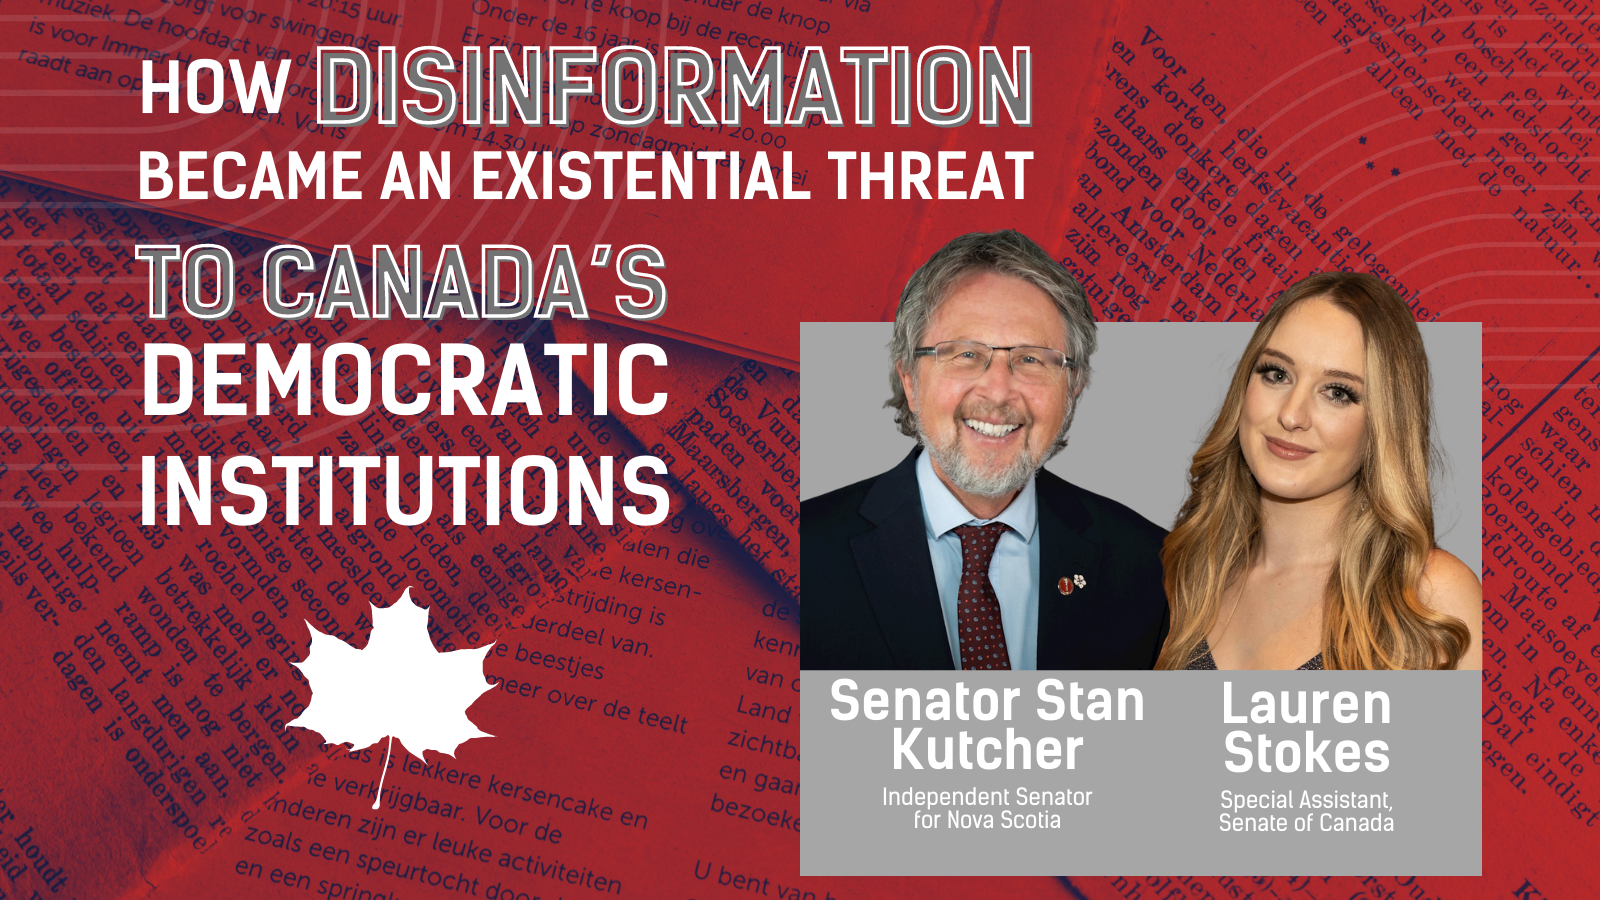 a banner with the title "How Disinformation Became an Existential threat to Canada's Democratic Institutions" alongside a headshot of an older white man and a young white woman